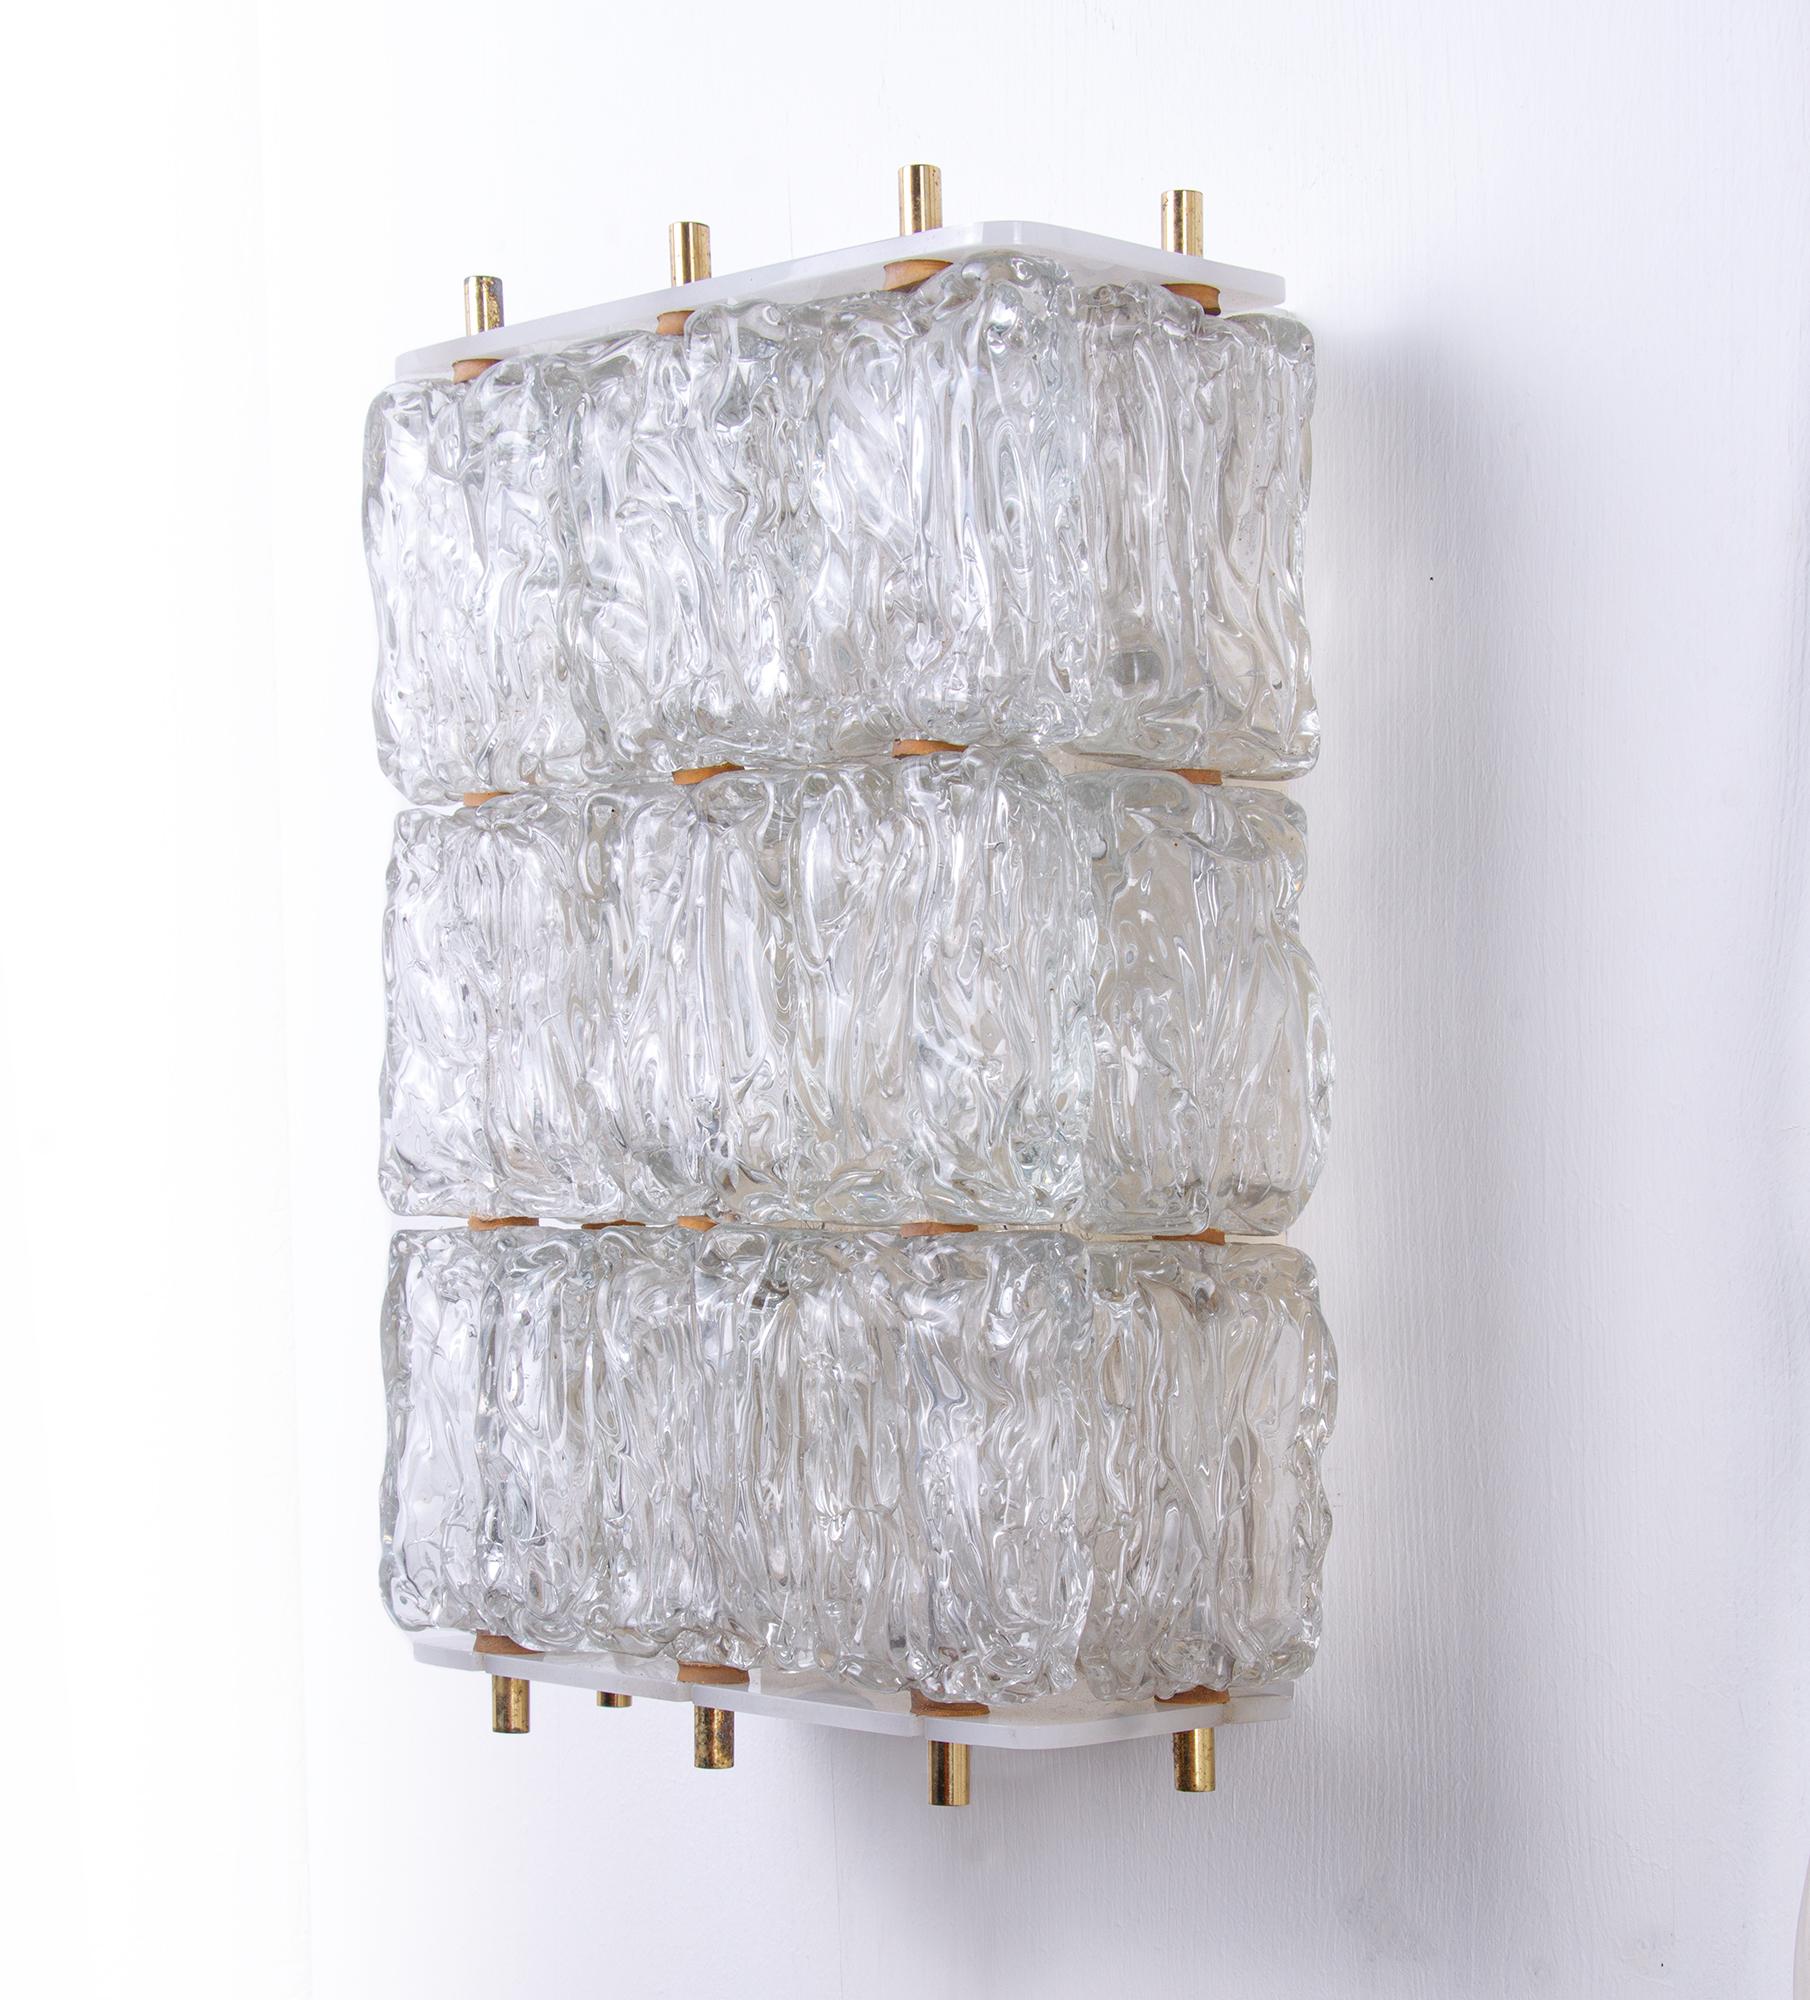 Venetian Barovier & Toso ice block wall sonce with clear textured Murano glass blocks. 
A real eyecatcher even unlit. Handmade in Murano, Venetia, Italy in the 1950s. 

Manufacturer: Barovier &Toso
Measures: width 13.77 x 8.3 x 4.9